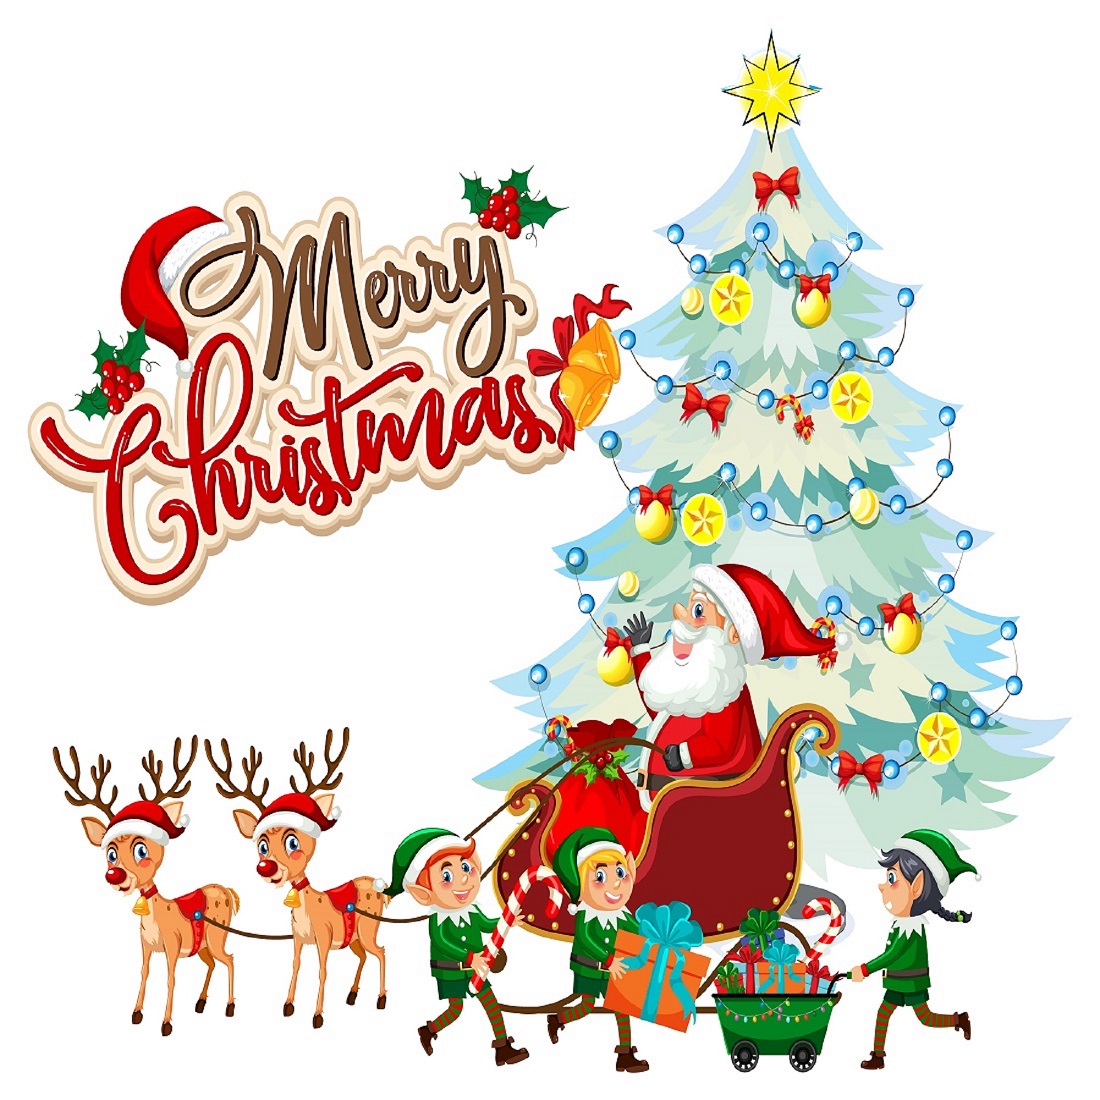 Merry Christmas text with cartoon character preview image.